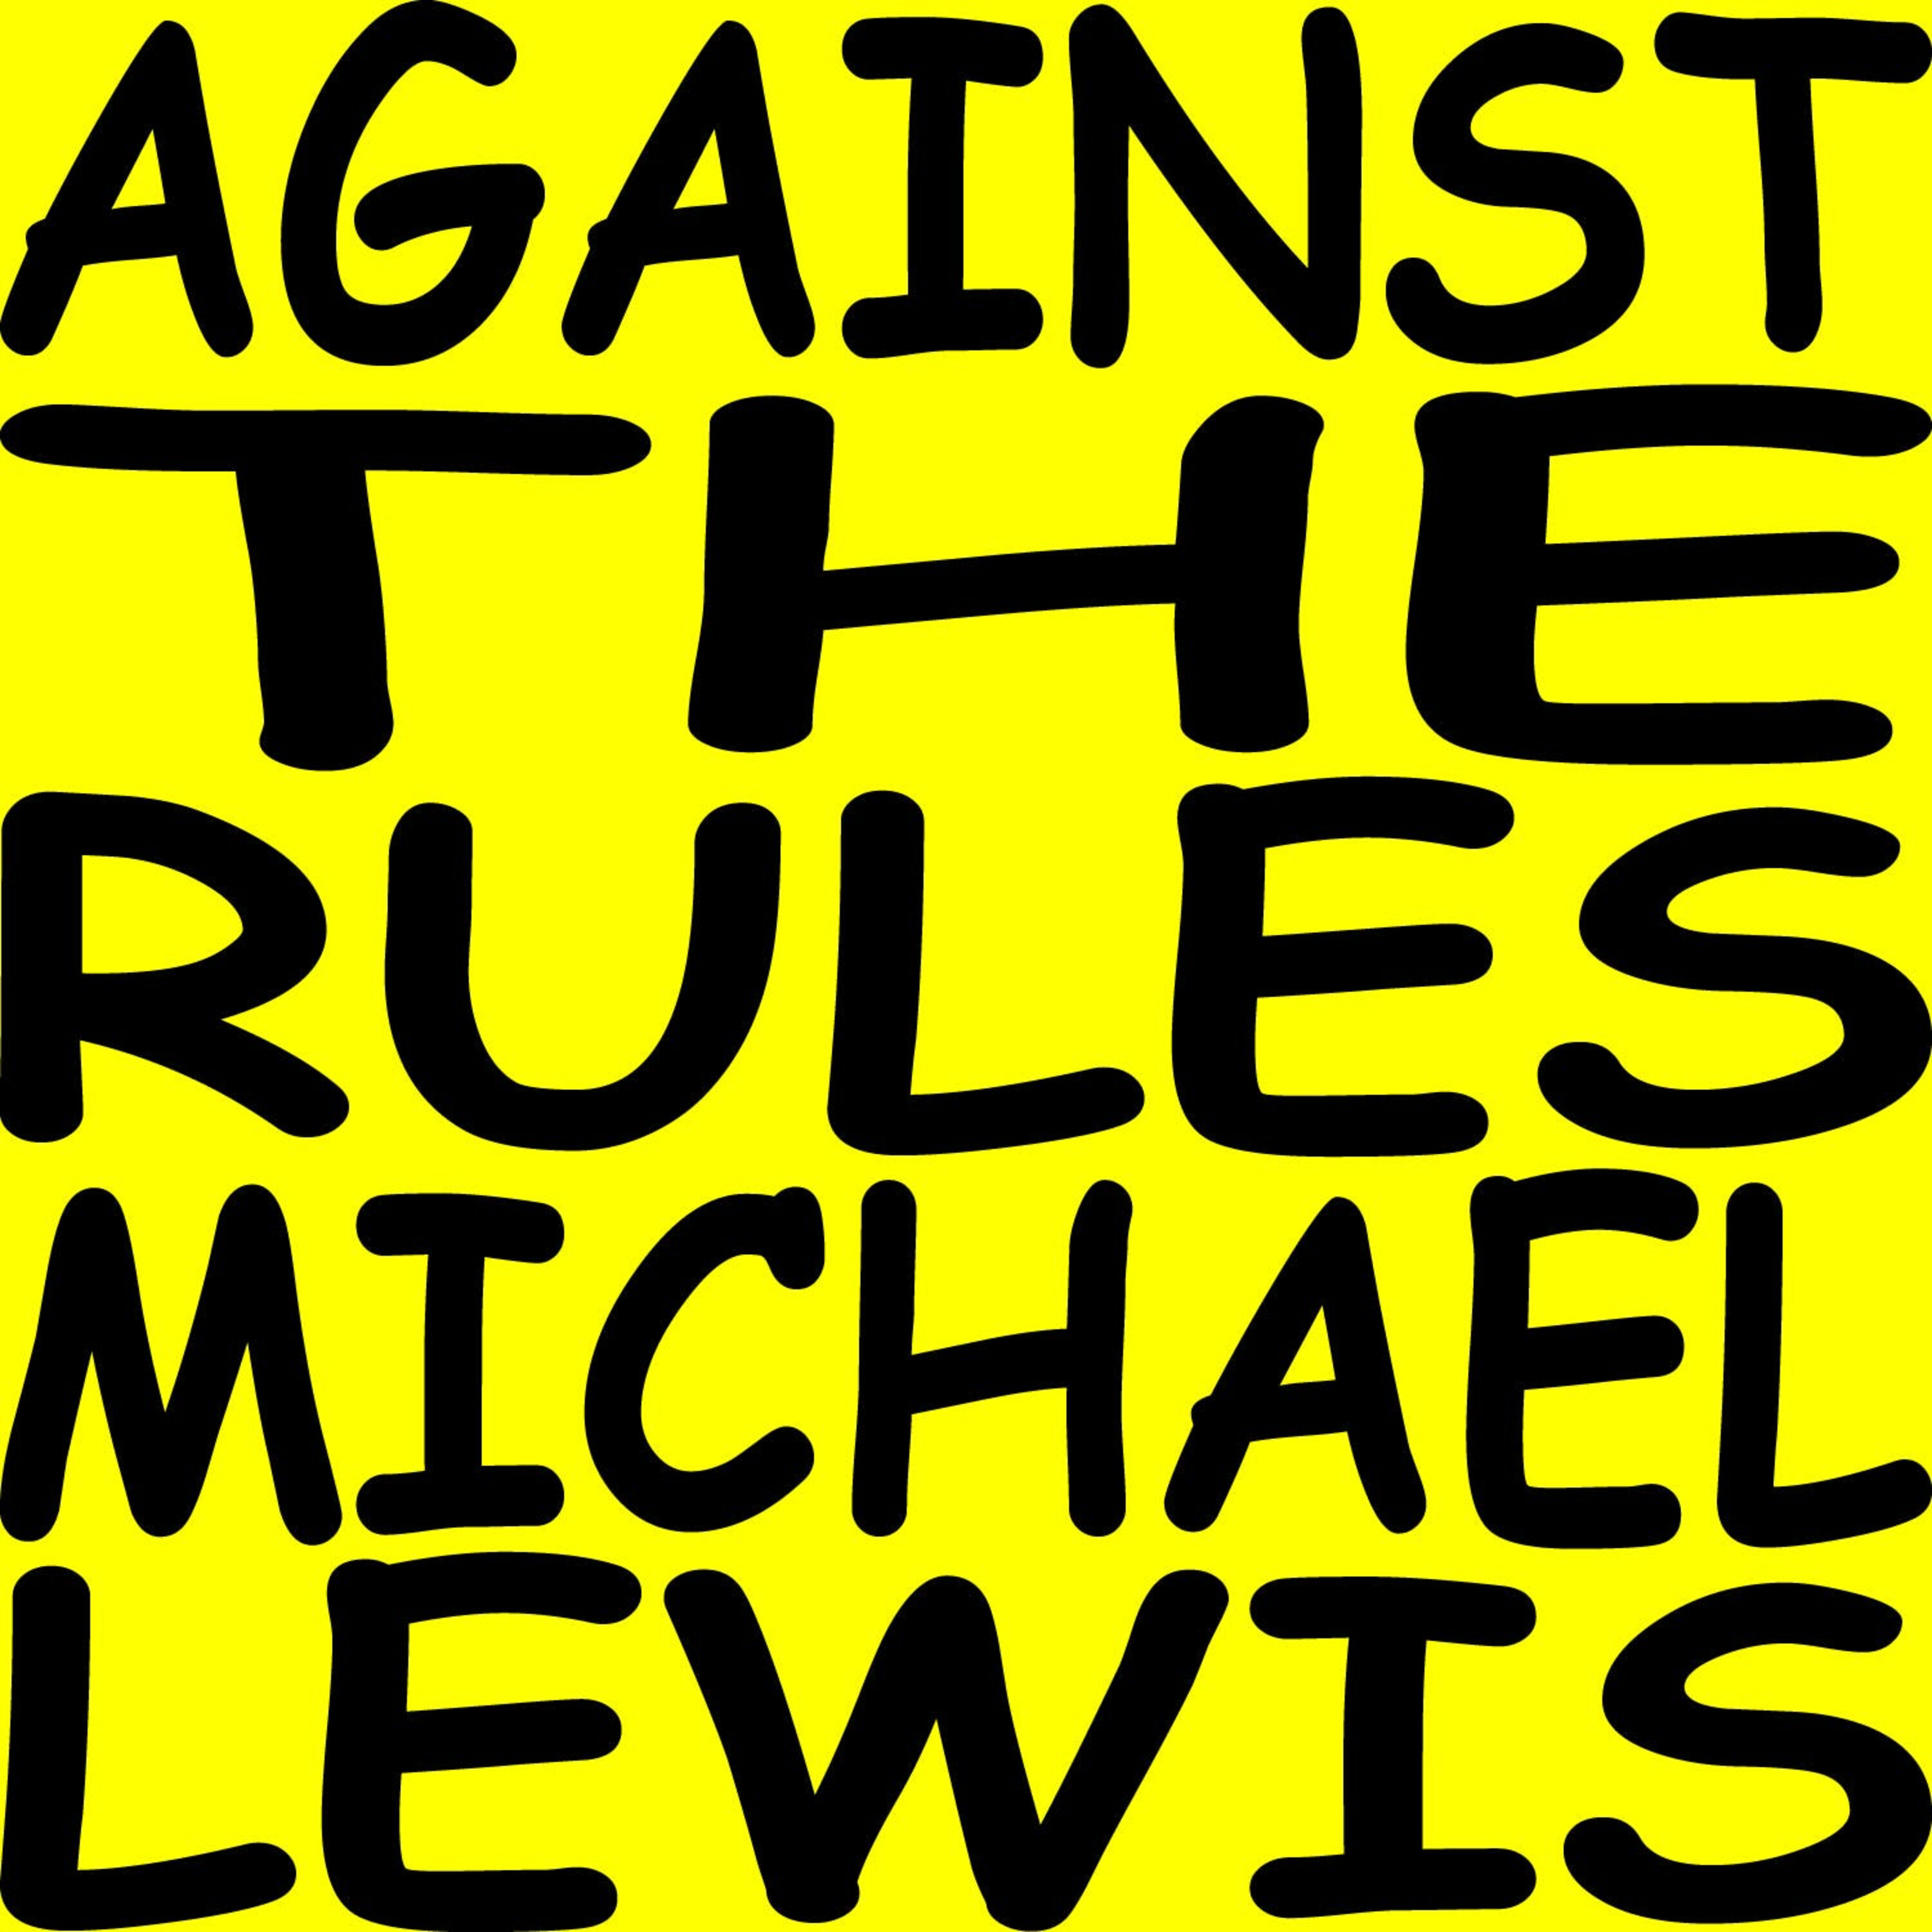 Introducing Against the Rules with Michael Lewis